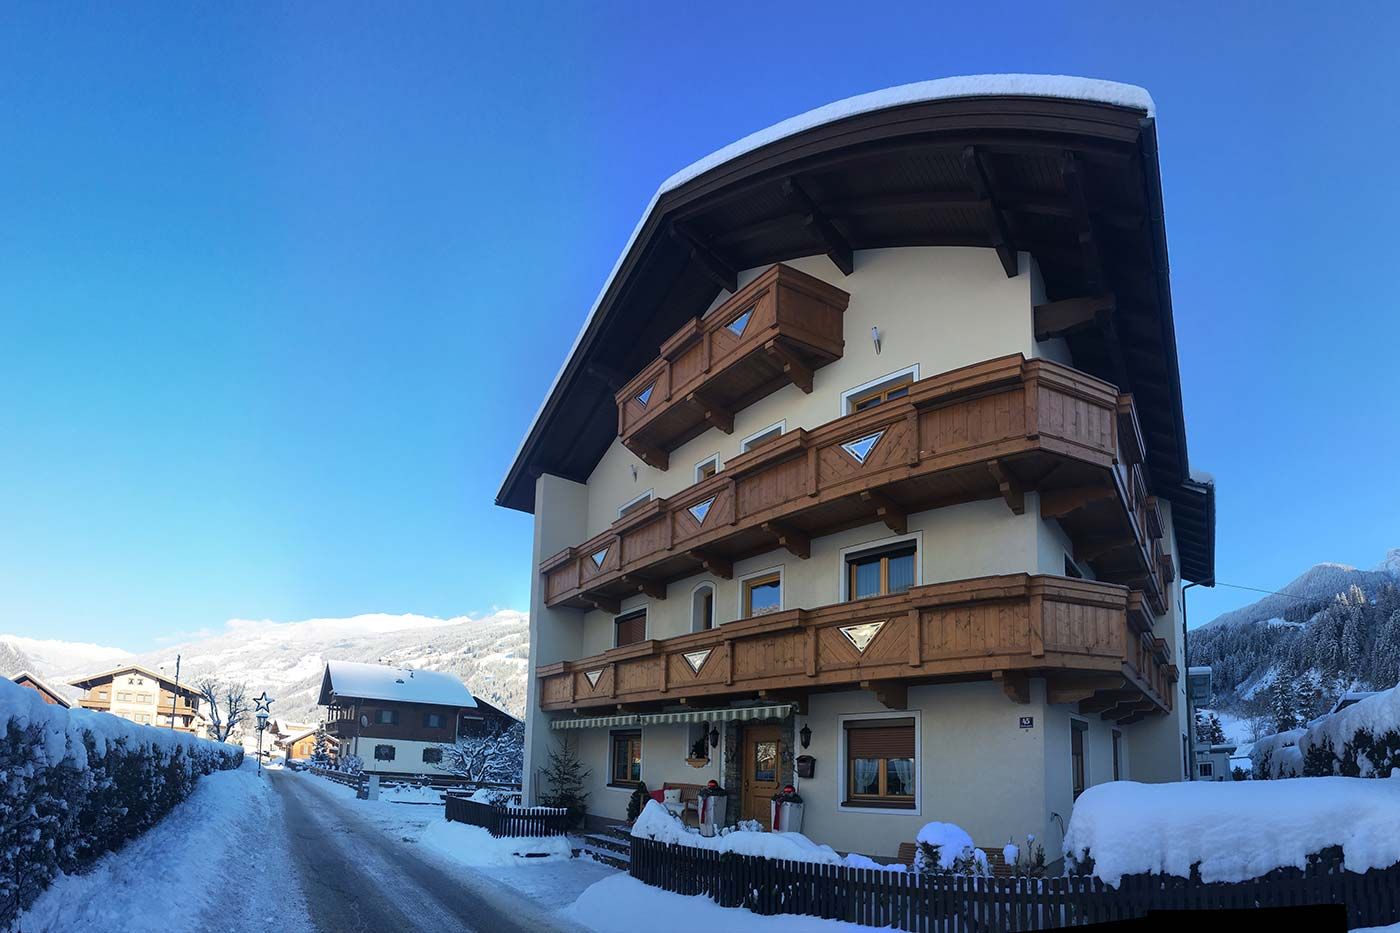 We, the Neuhauser family, welcome you to the wonderful village of Zell am Ziller!